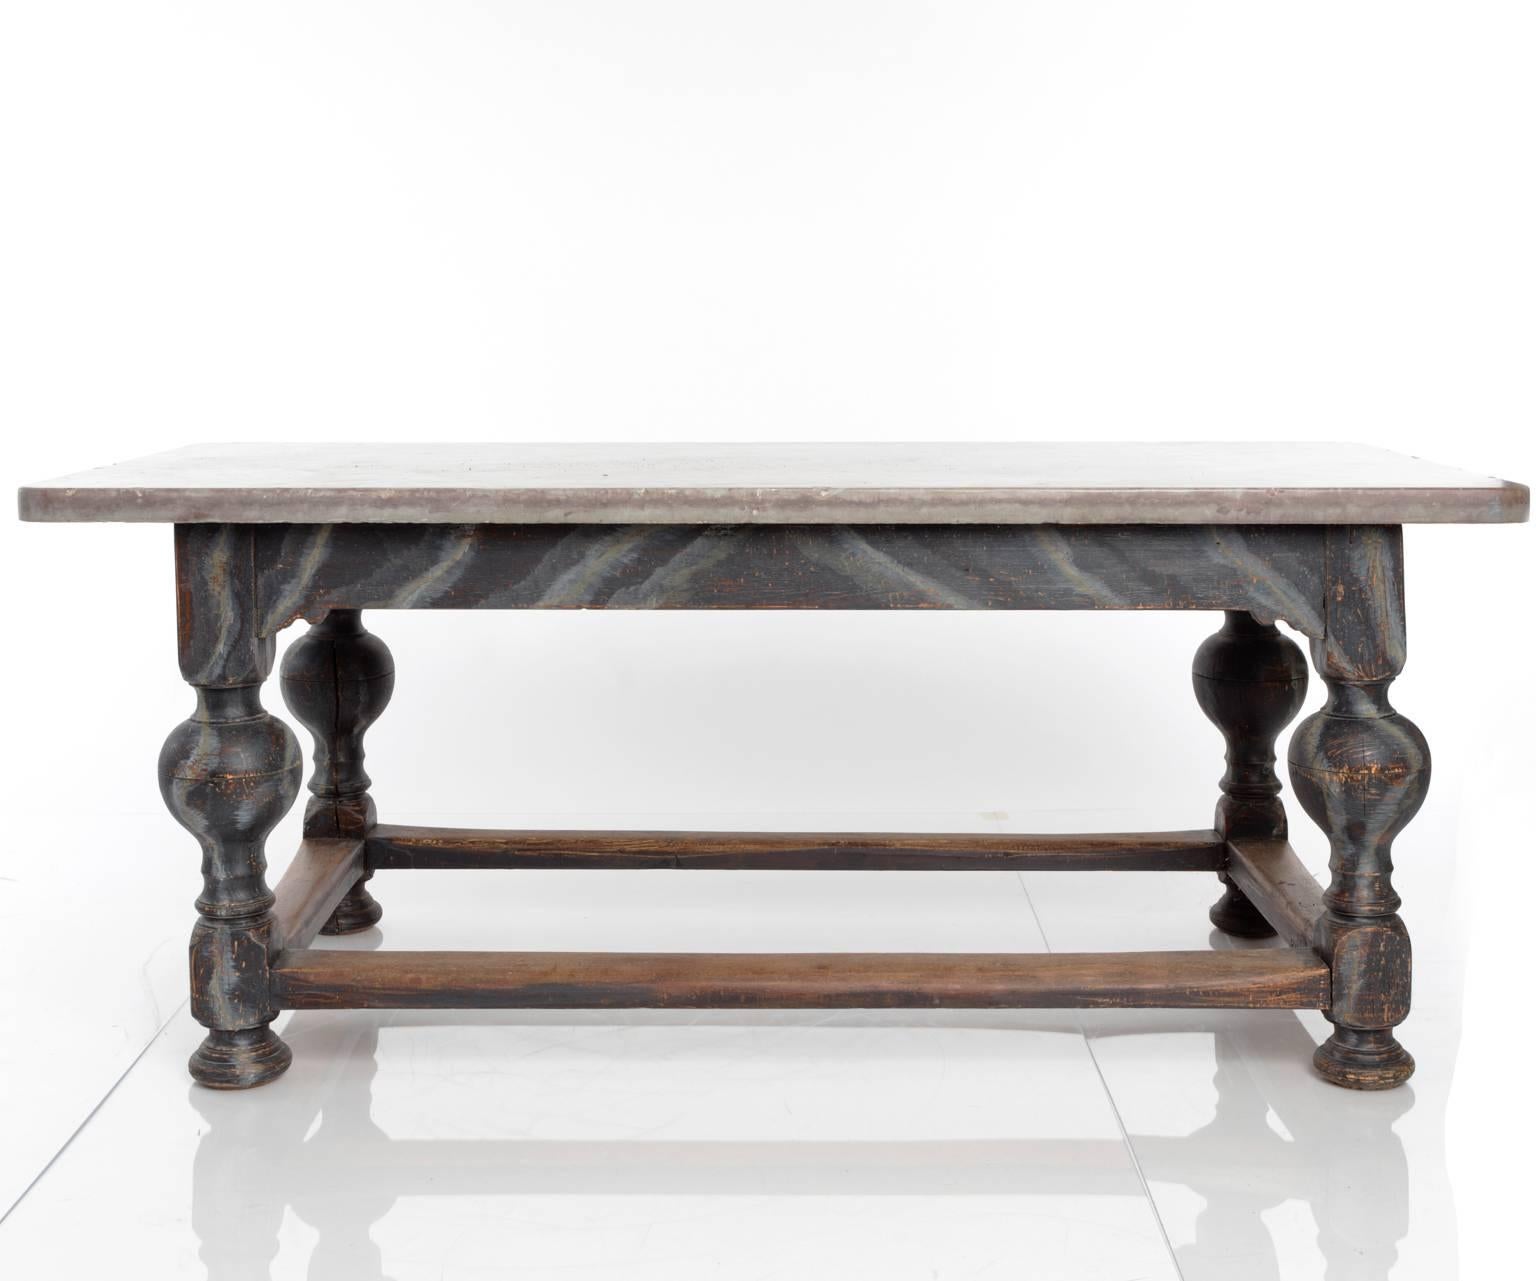 A large oak table with Oland stone top
and marbleized gray painted legs, side stretchers. 
Sweden, 18th-19th century.
 